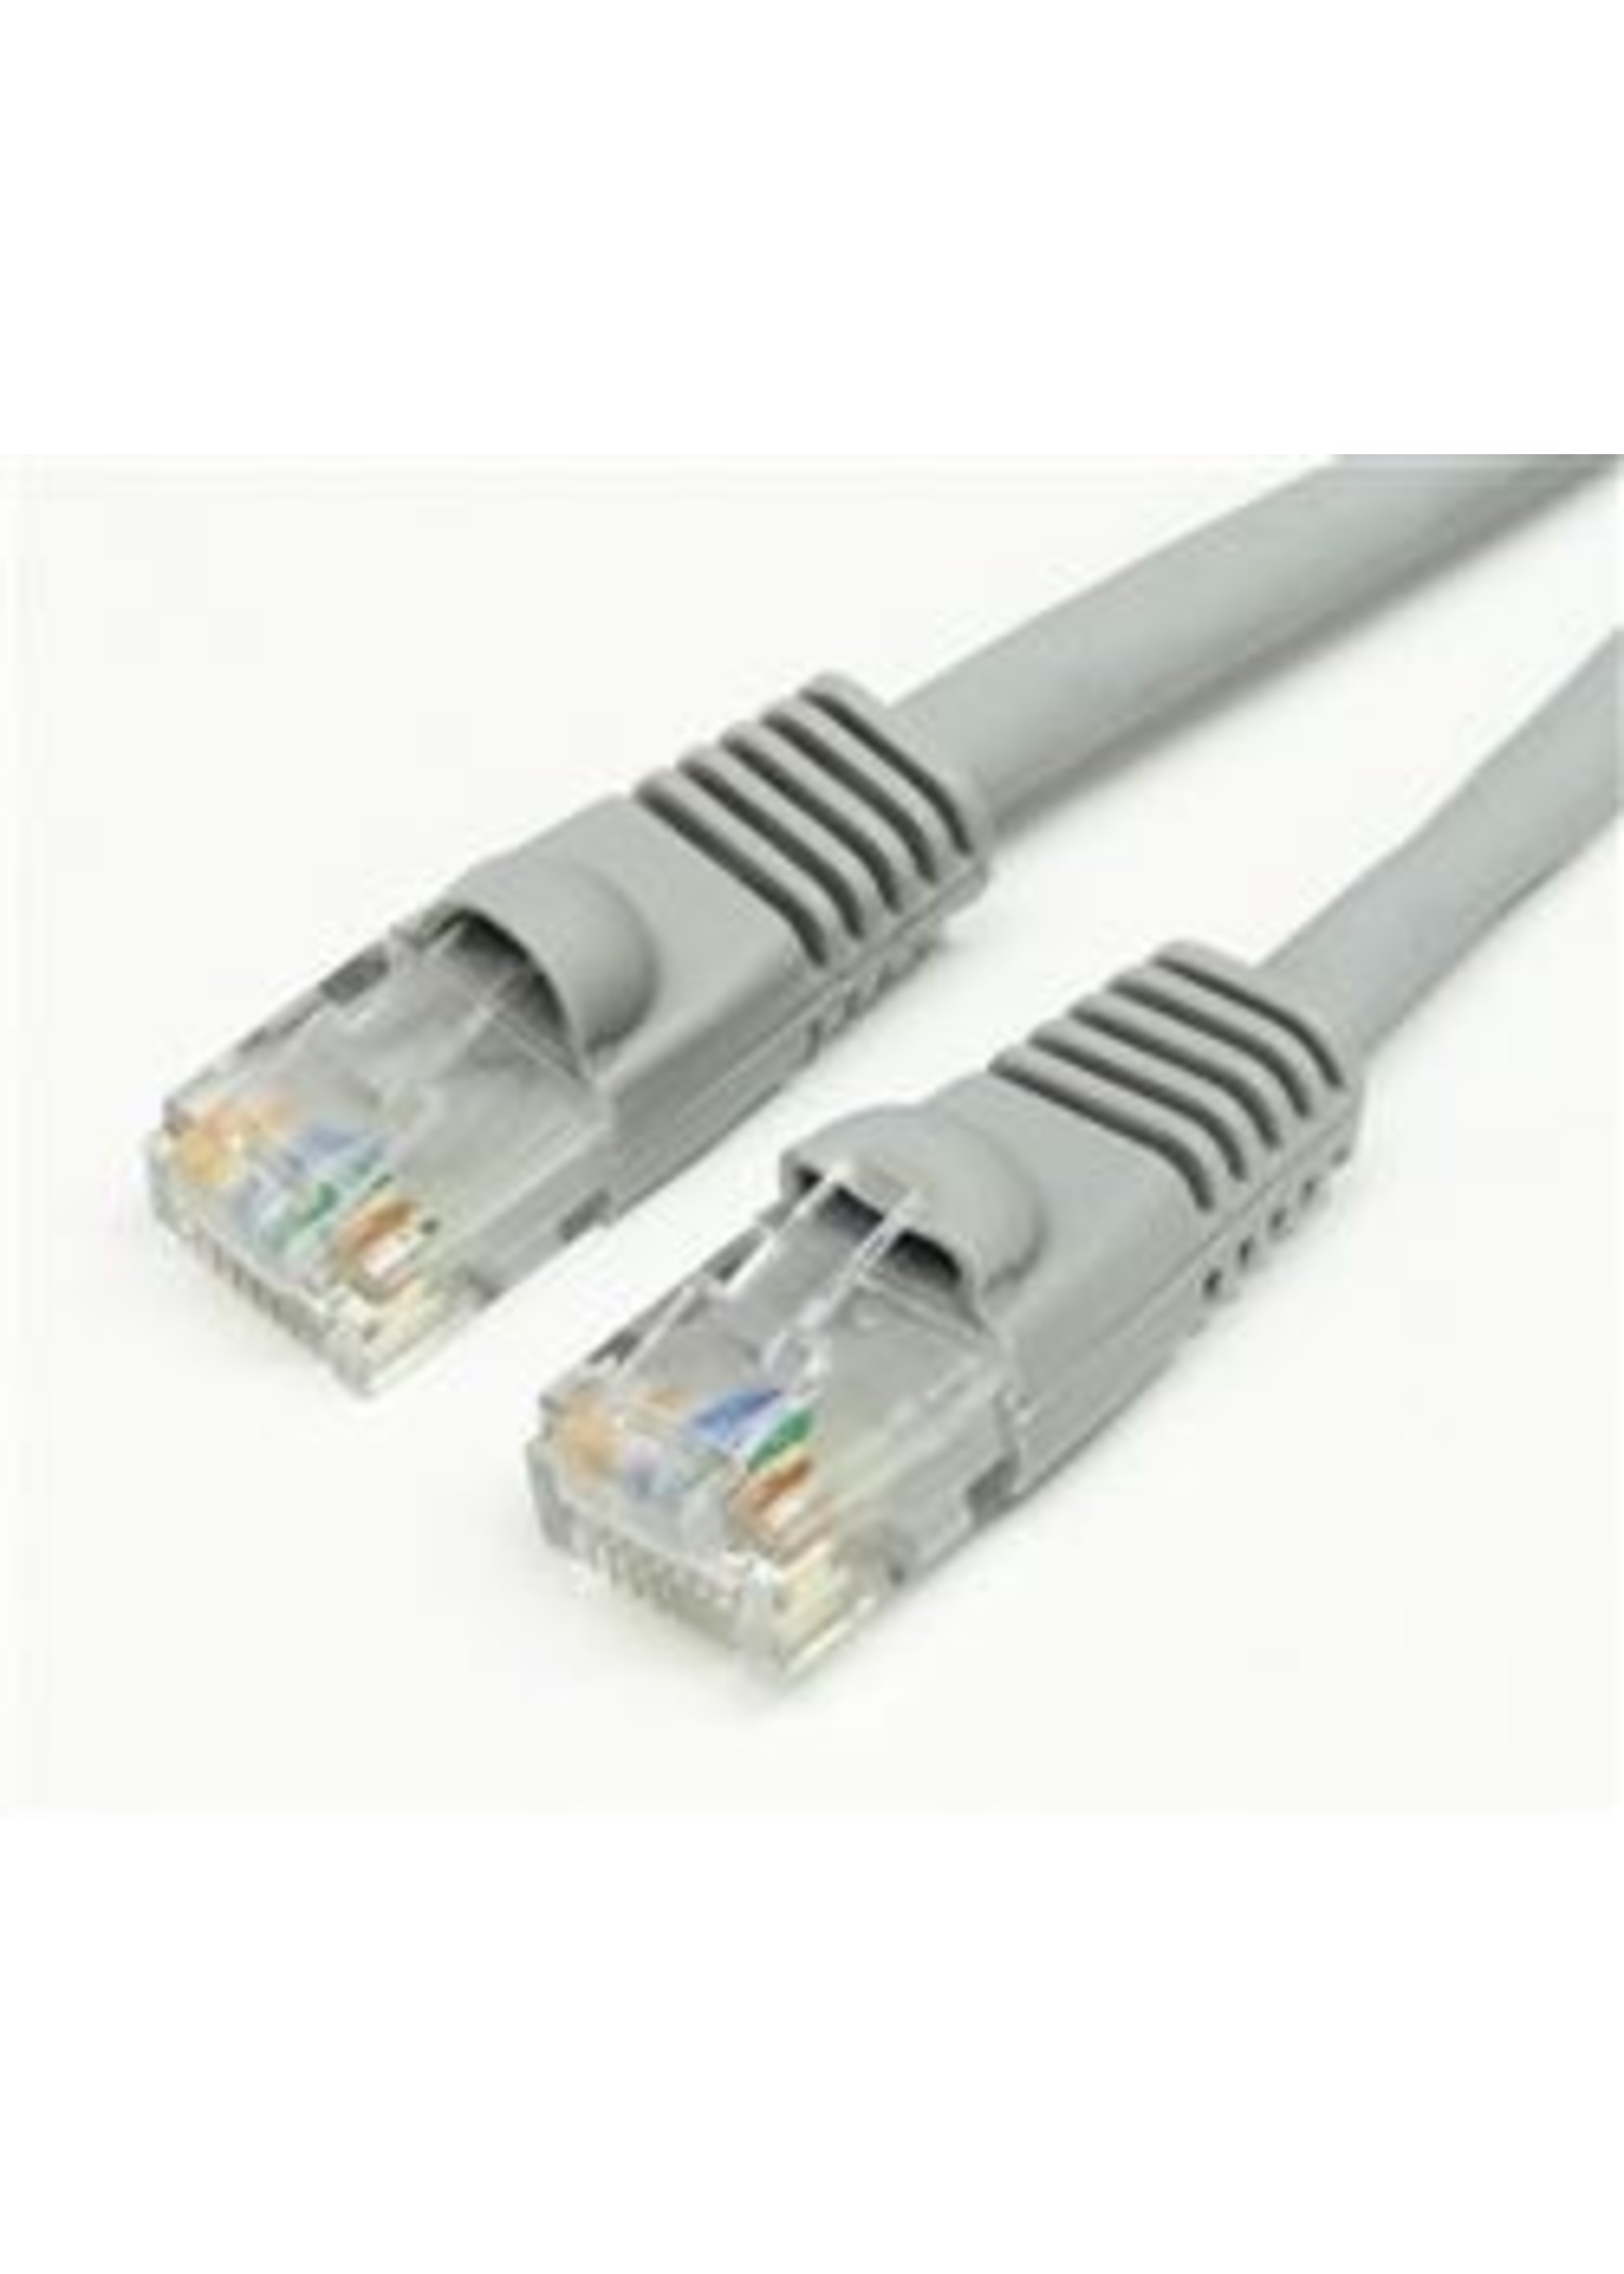 3' Cat6 24 AWG Ethernet patch cable White